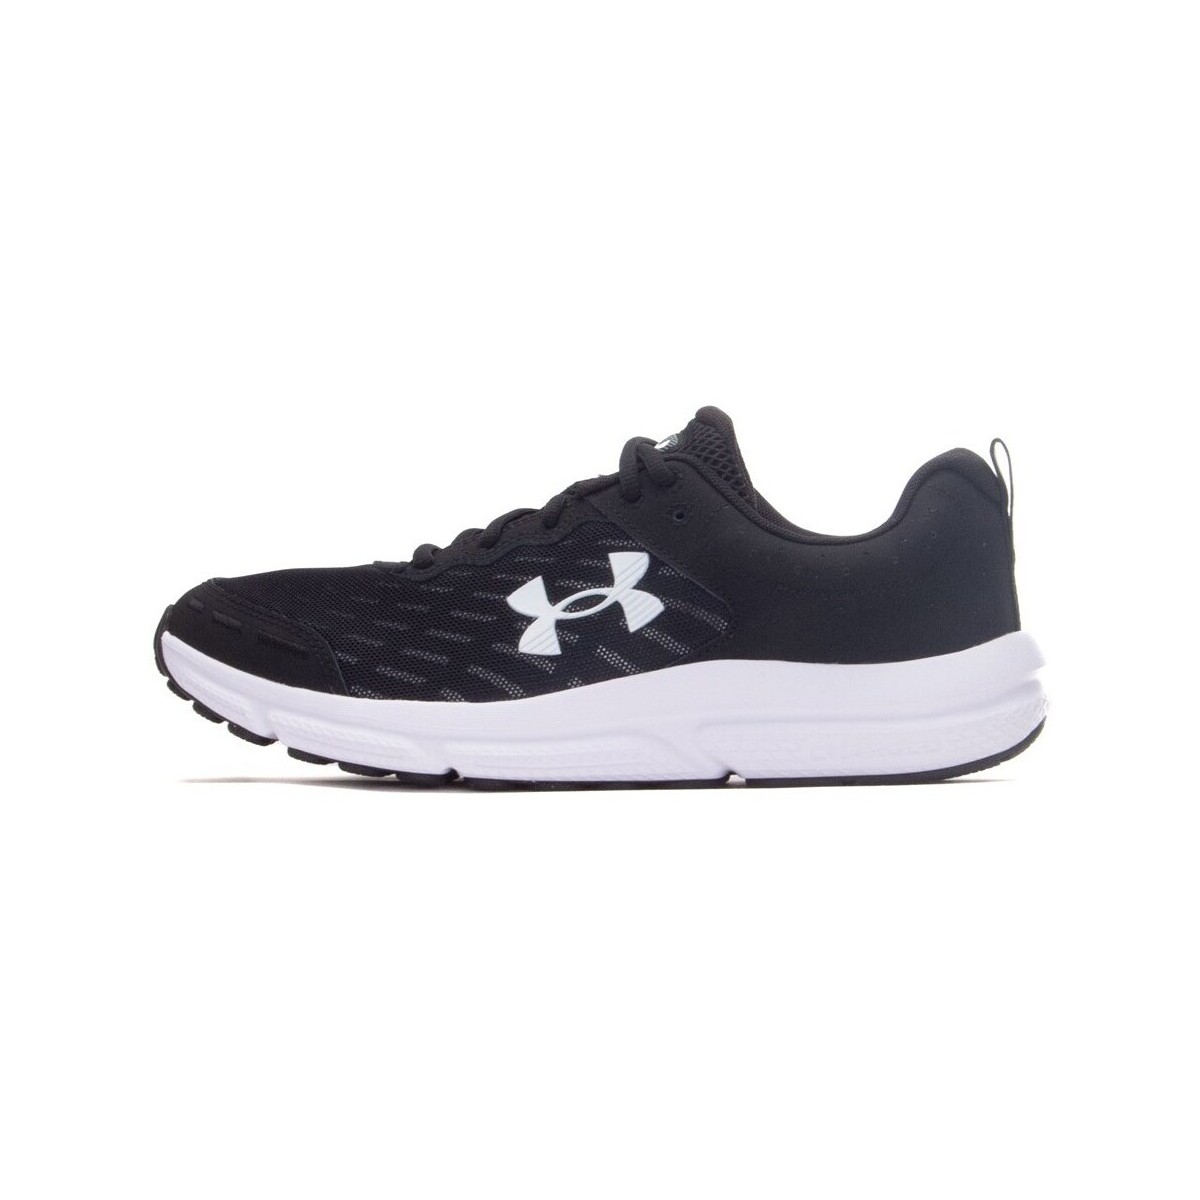 Under Armour Charged Assert 10 Black